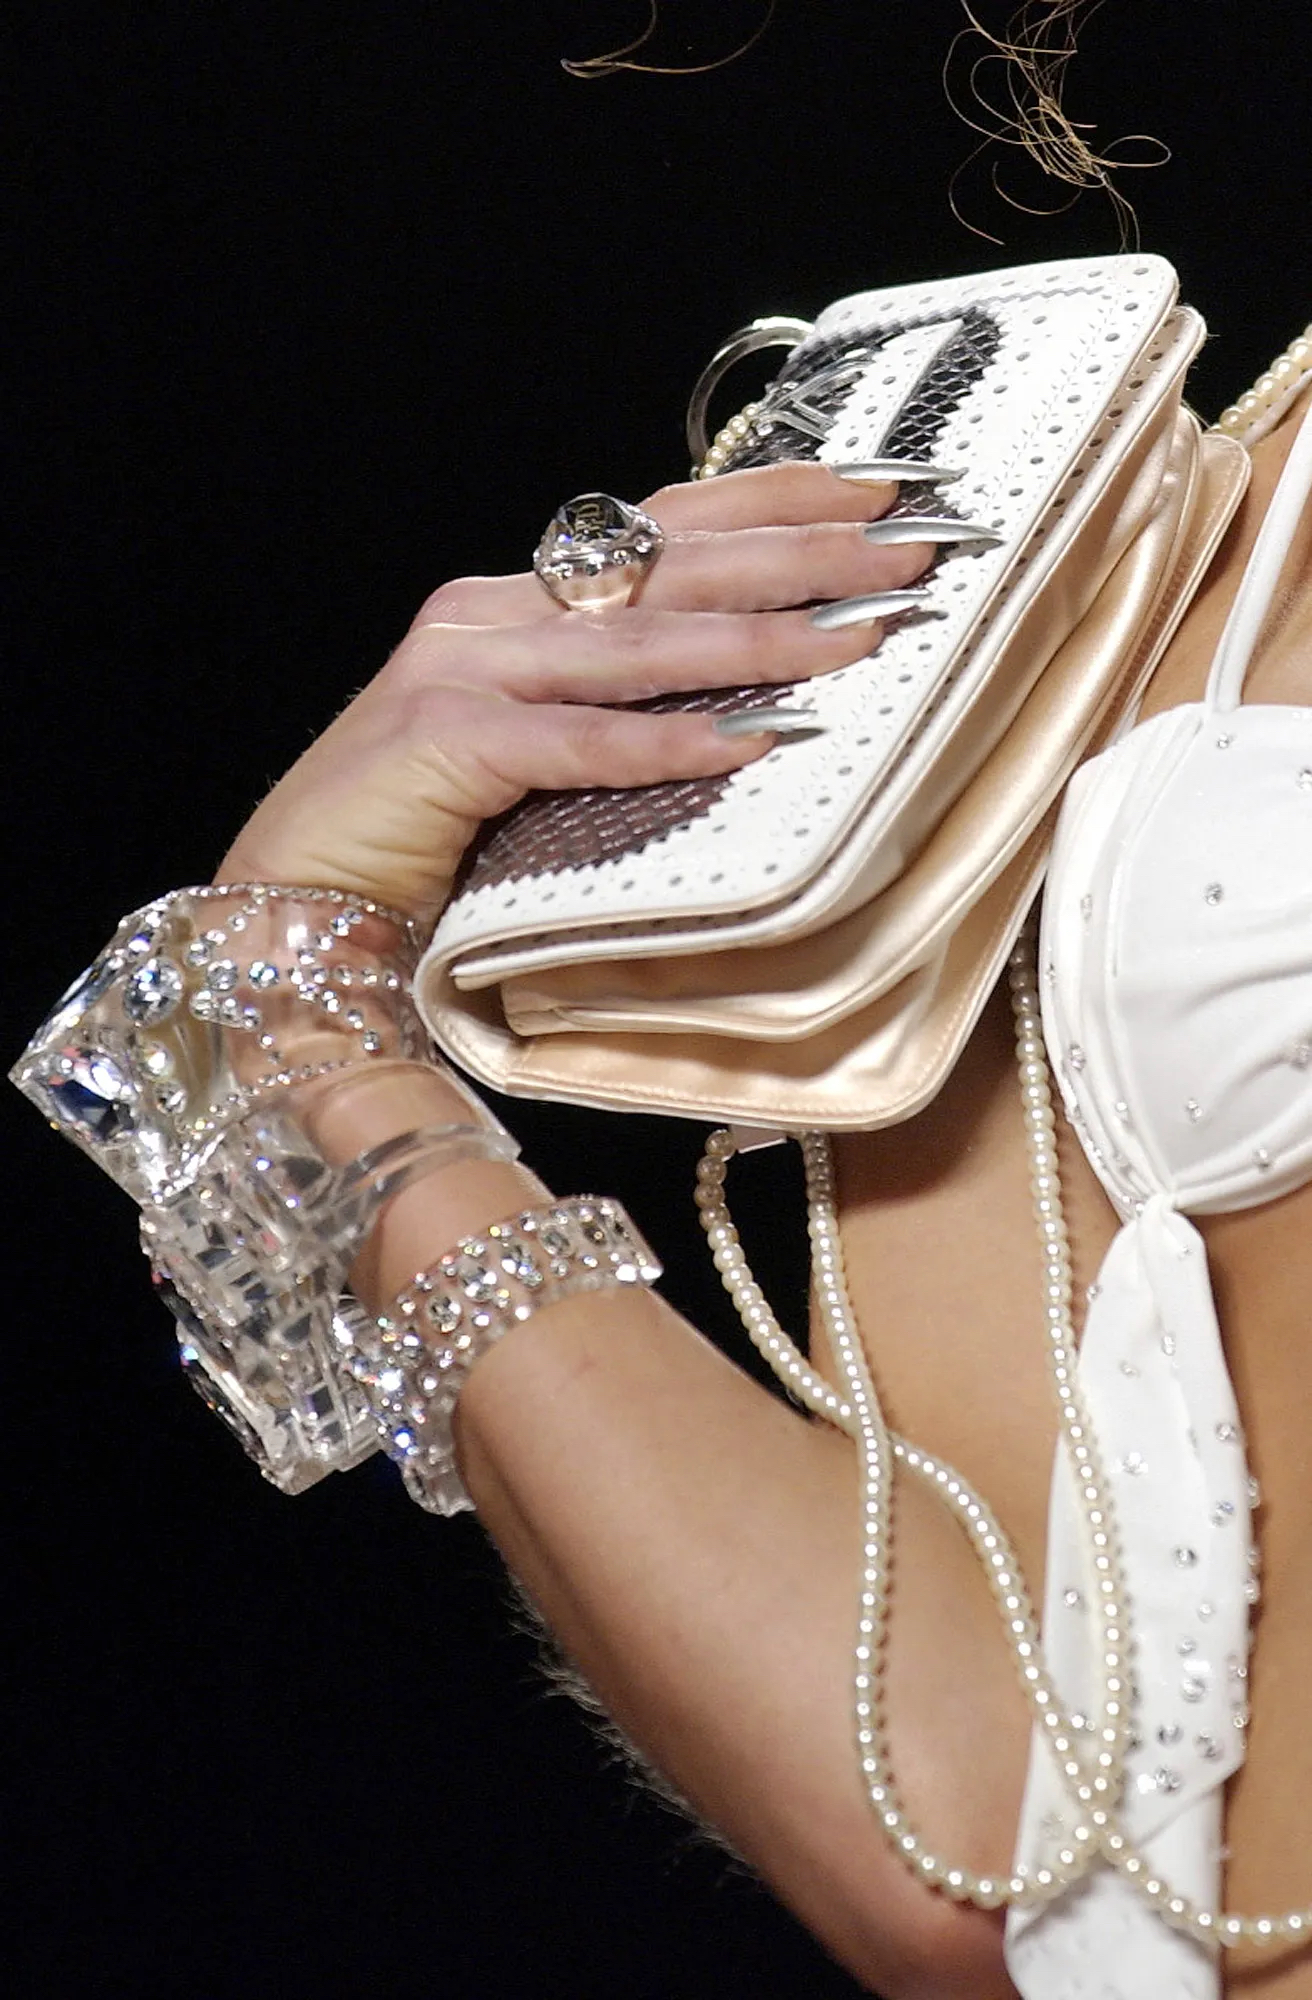 A CHRISTIAN DIOR 'D' TRICK BAG WITH FAUX PEARLS - Image 6 of 22